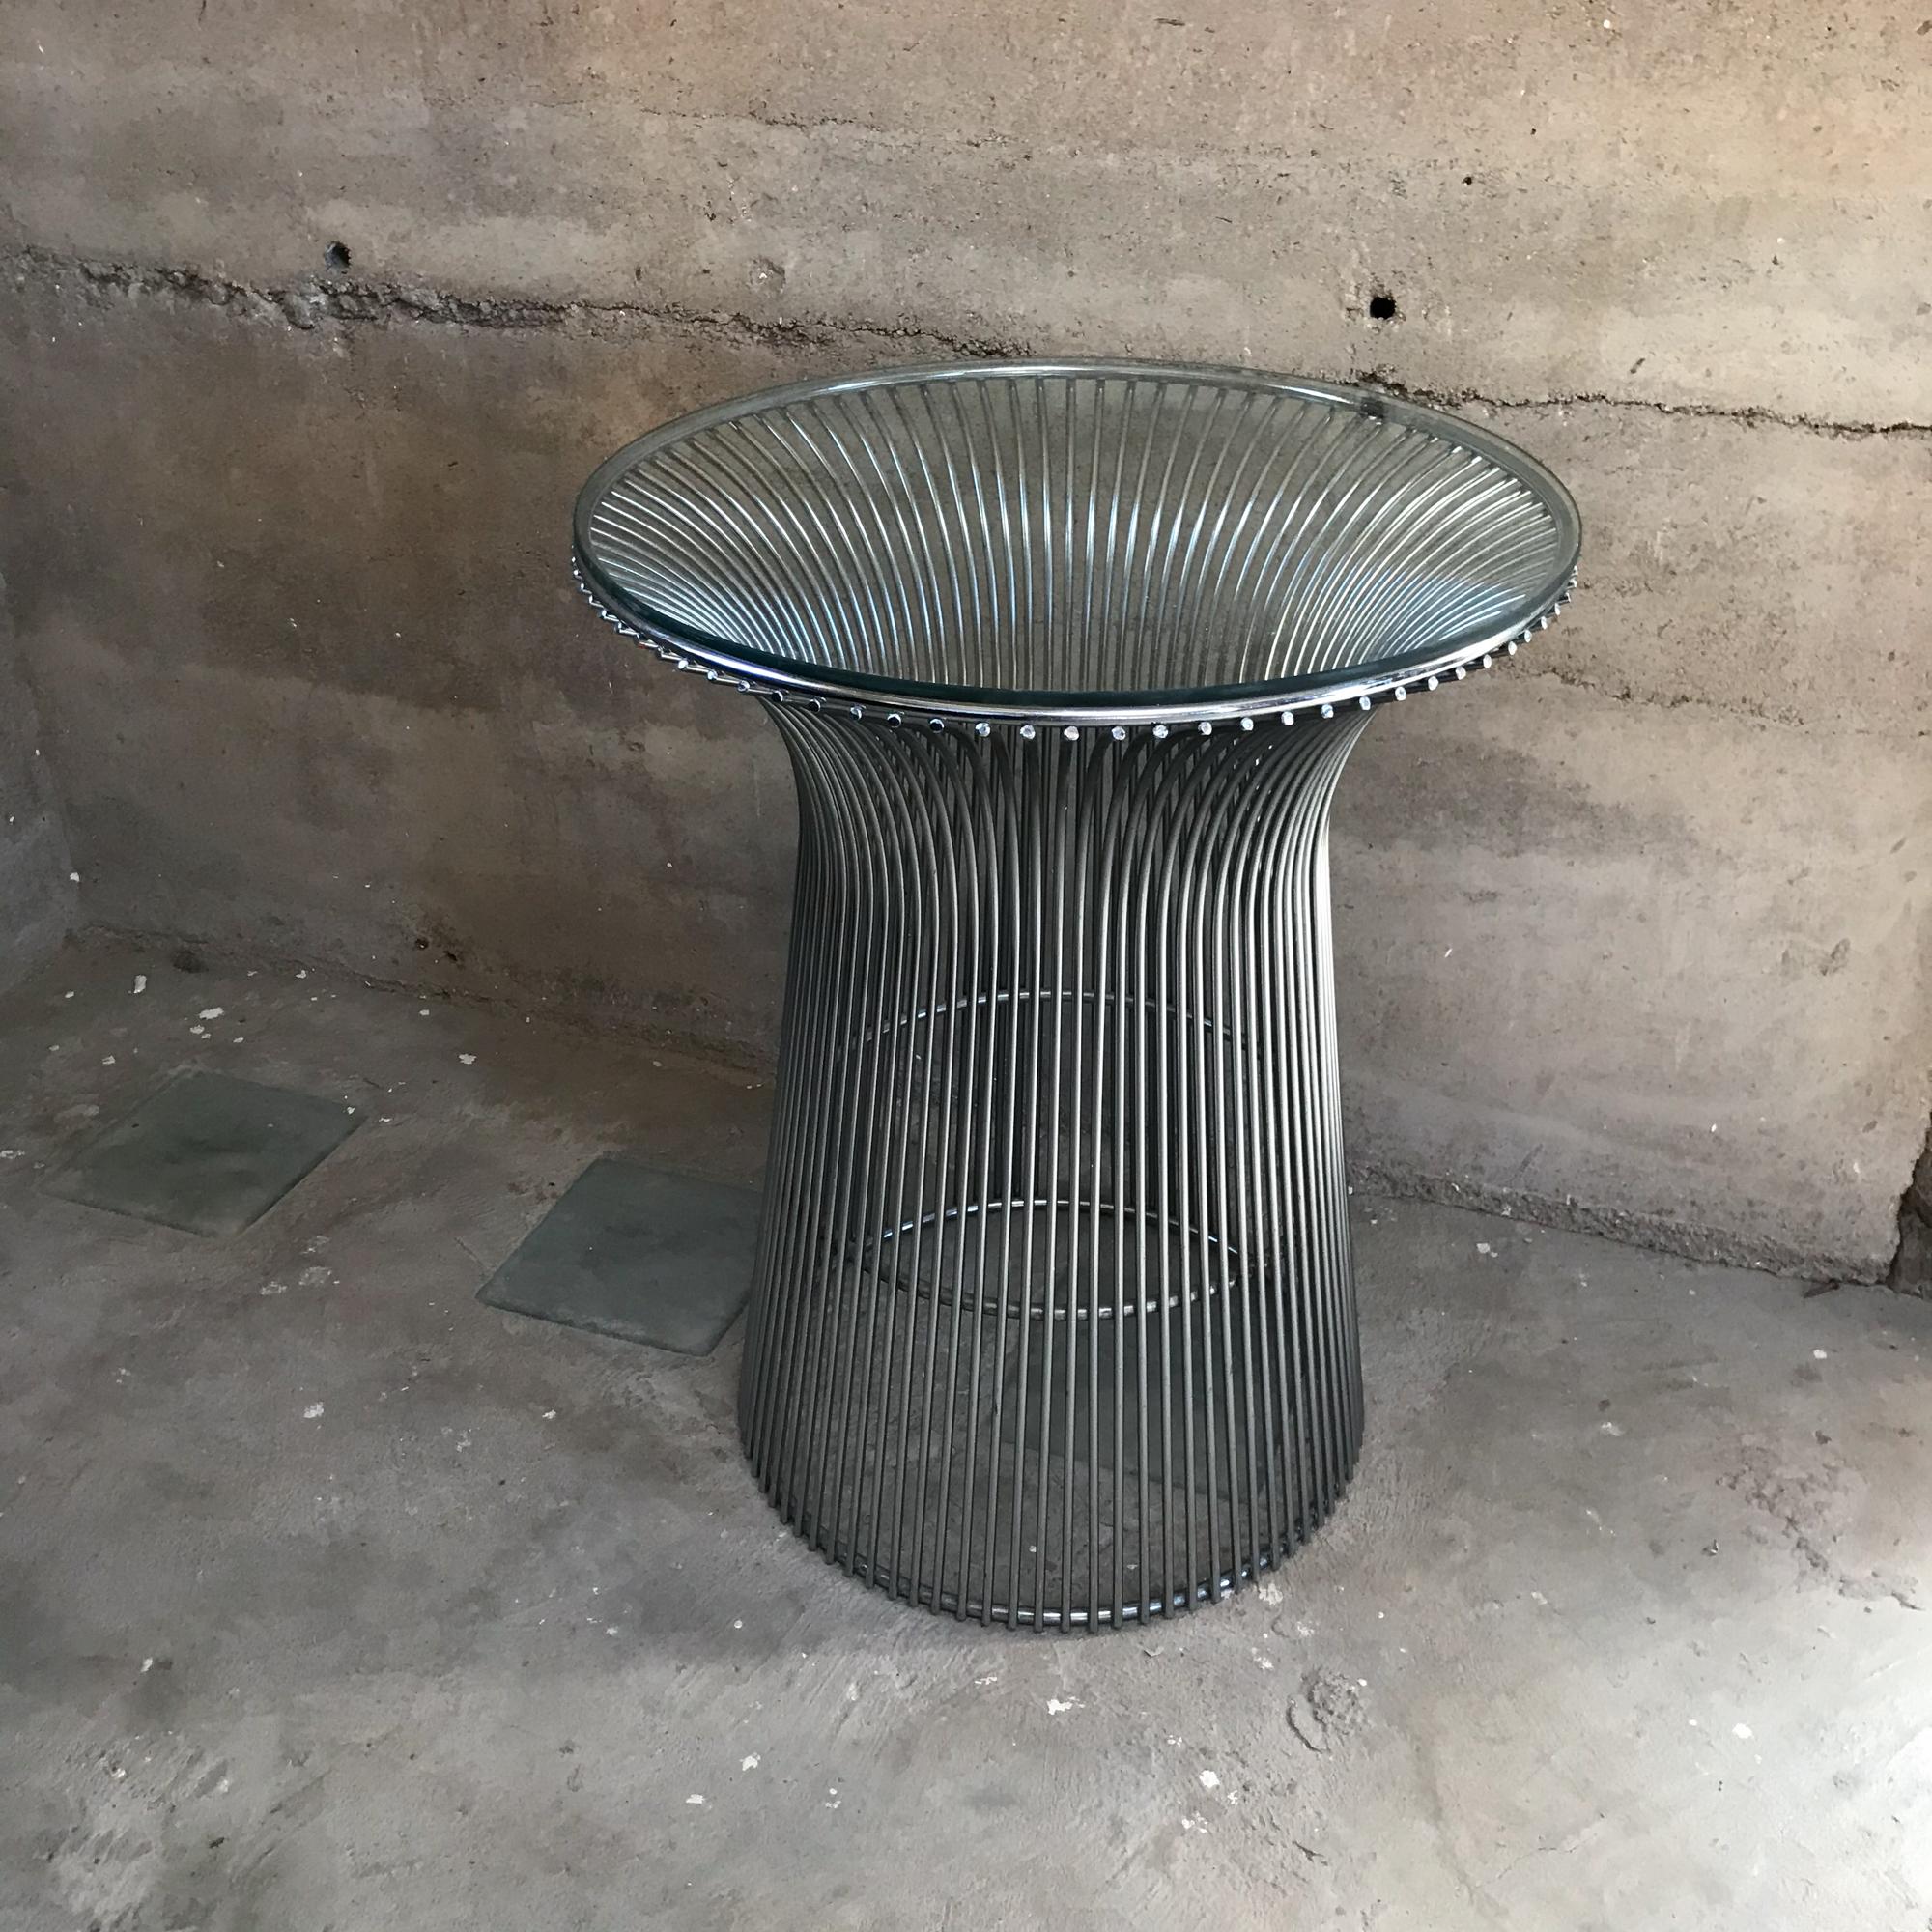 Chrome Side Table
Round Side Table Organic Modern showcasing industrial material in a graceful design.
Style of Warren Platner for Knoll 1970s
Chrome plated steel with original glass top.
Dimensions: 24.25 in H x 20 in diameter.
Original Preowned